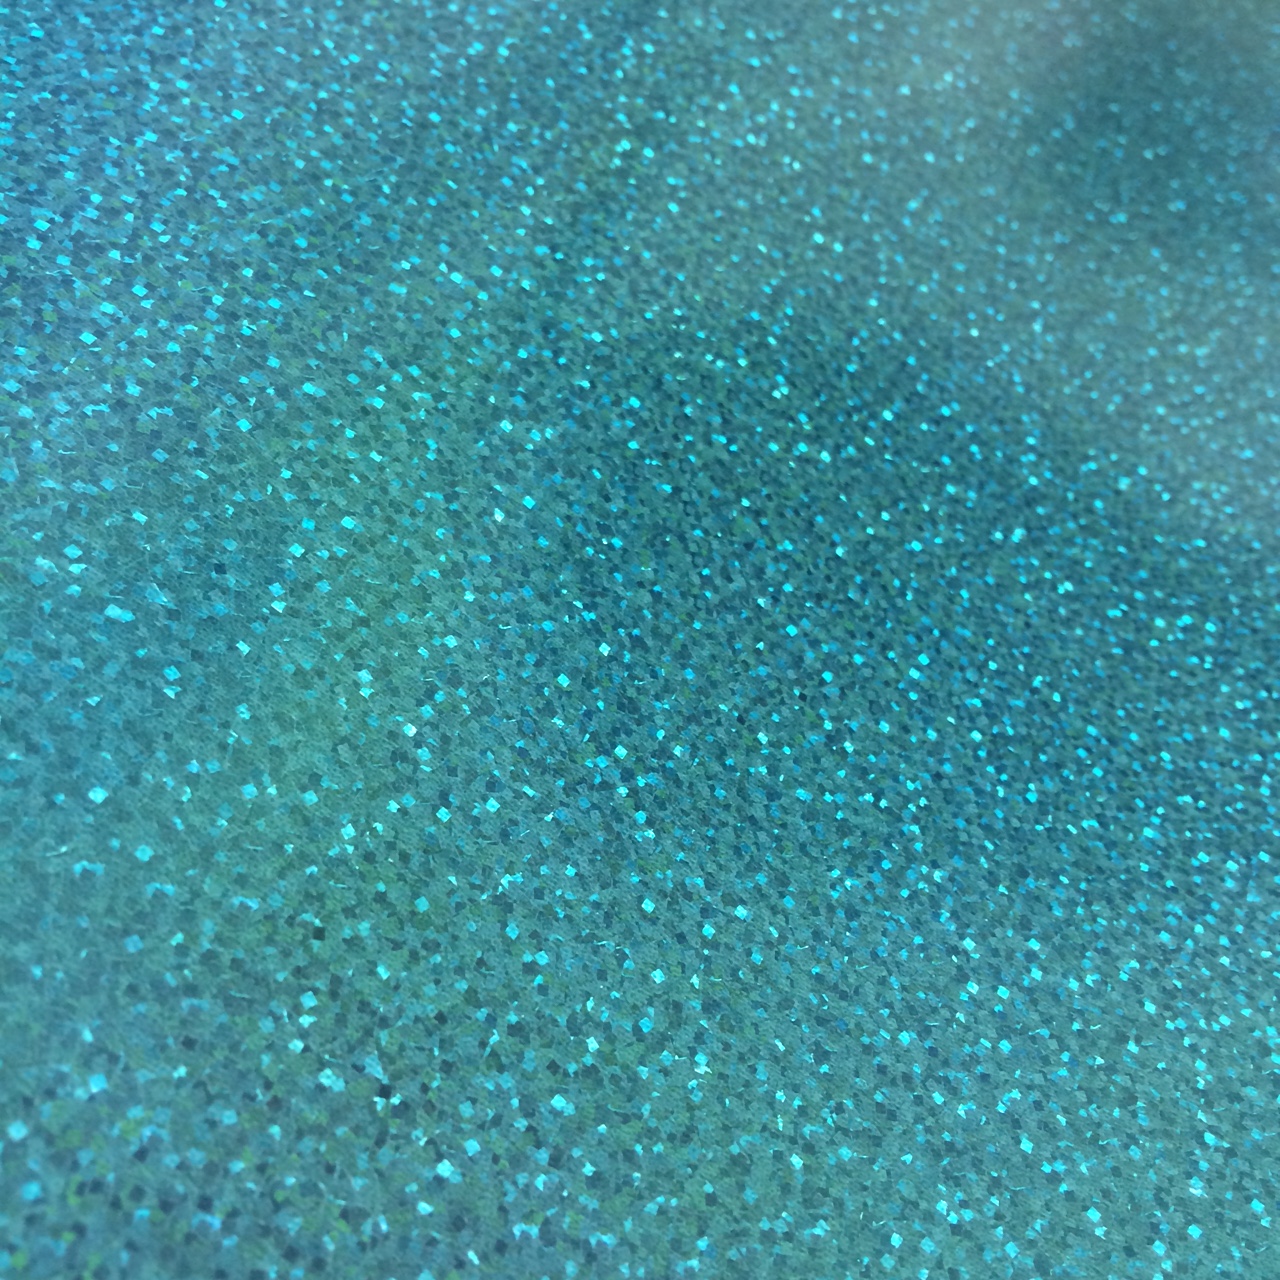  Teal Holographic Glitter Textures Wallpaper by Decorline DL40707